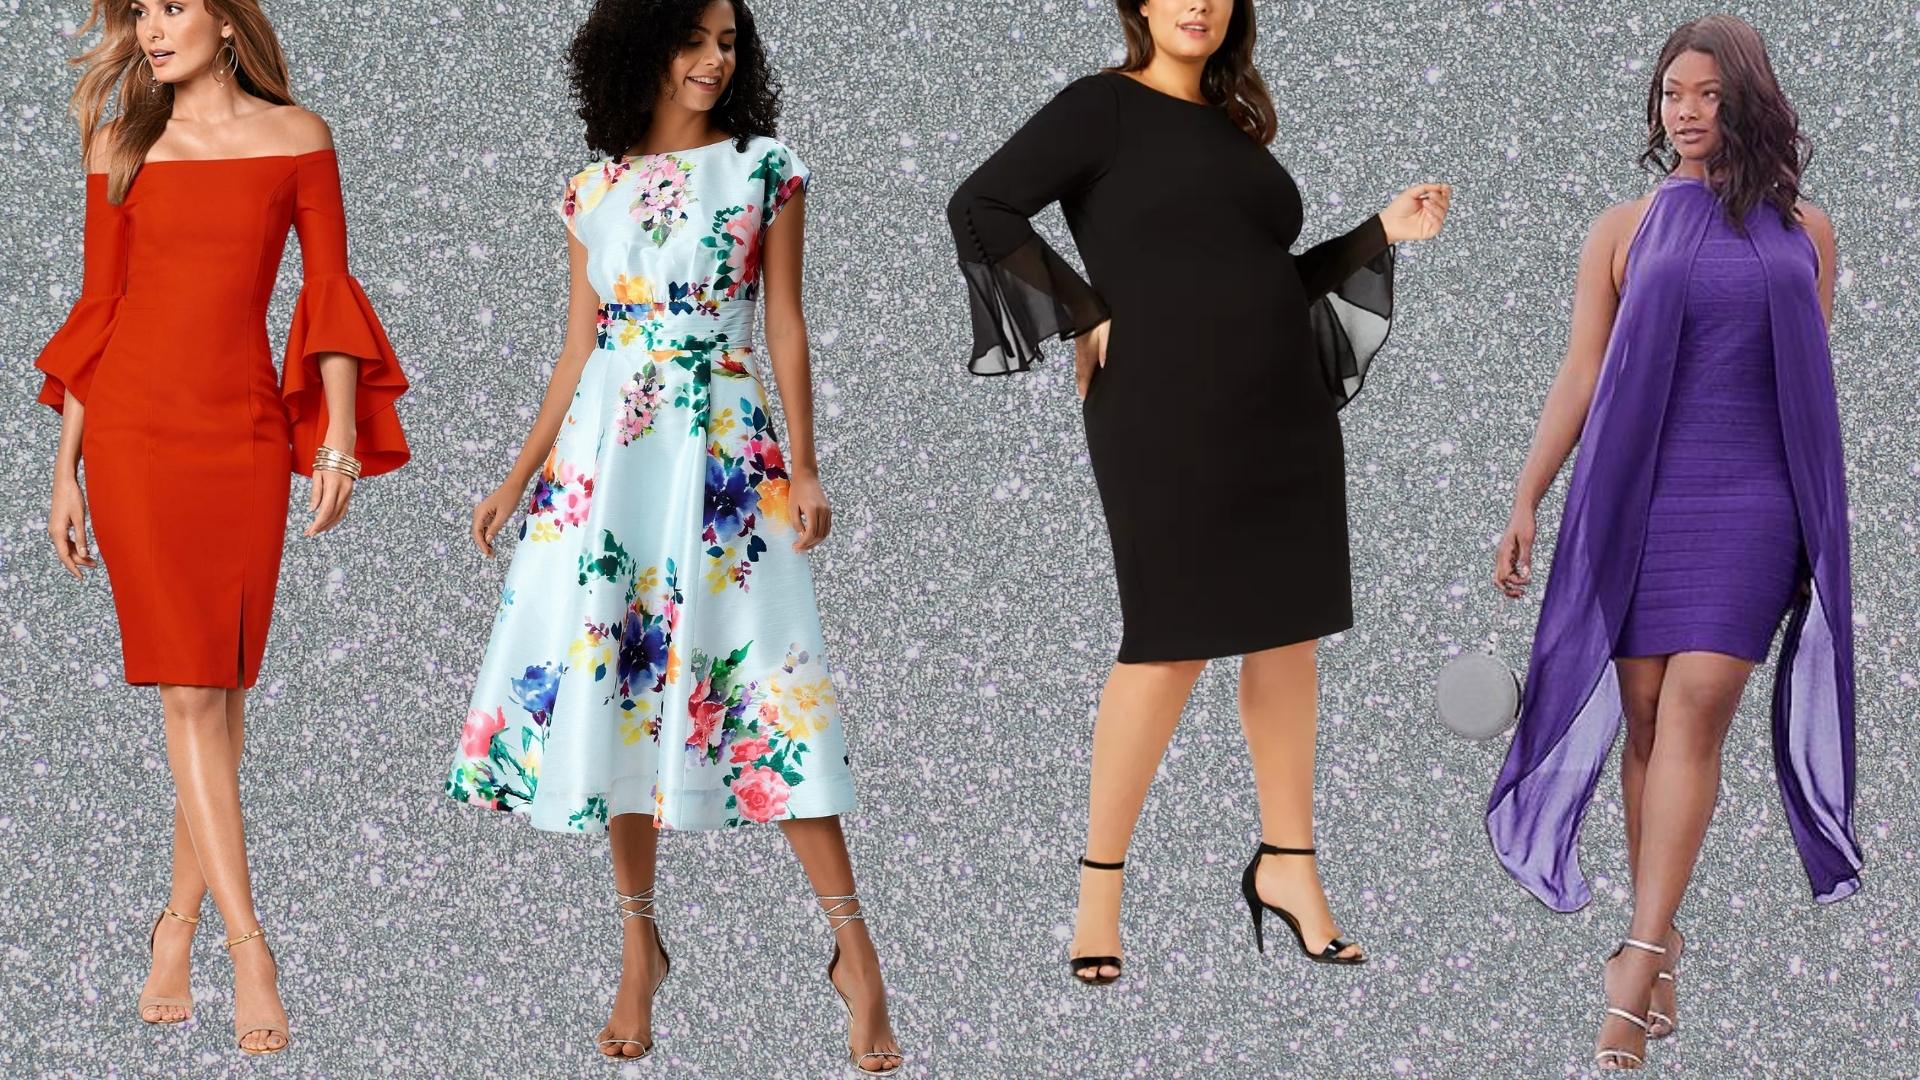 10 best cocktail dresses for women over 50 - woman's world